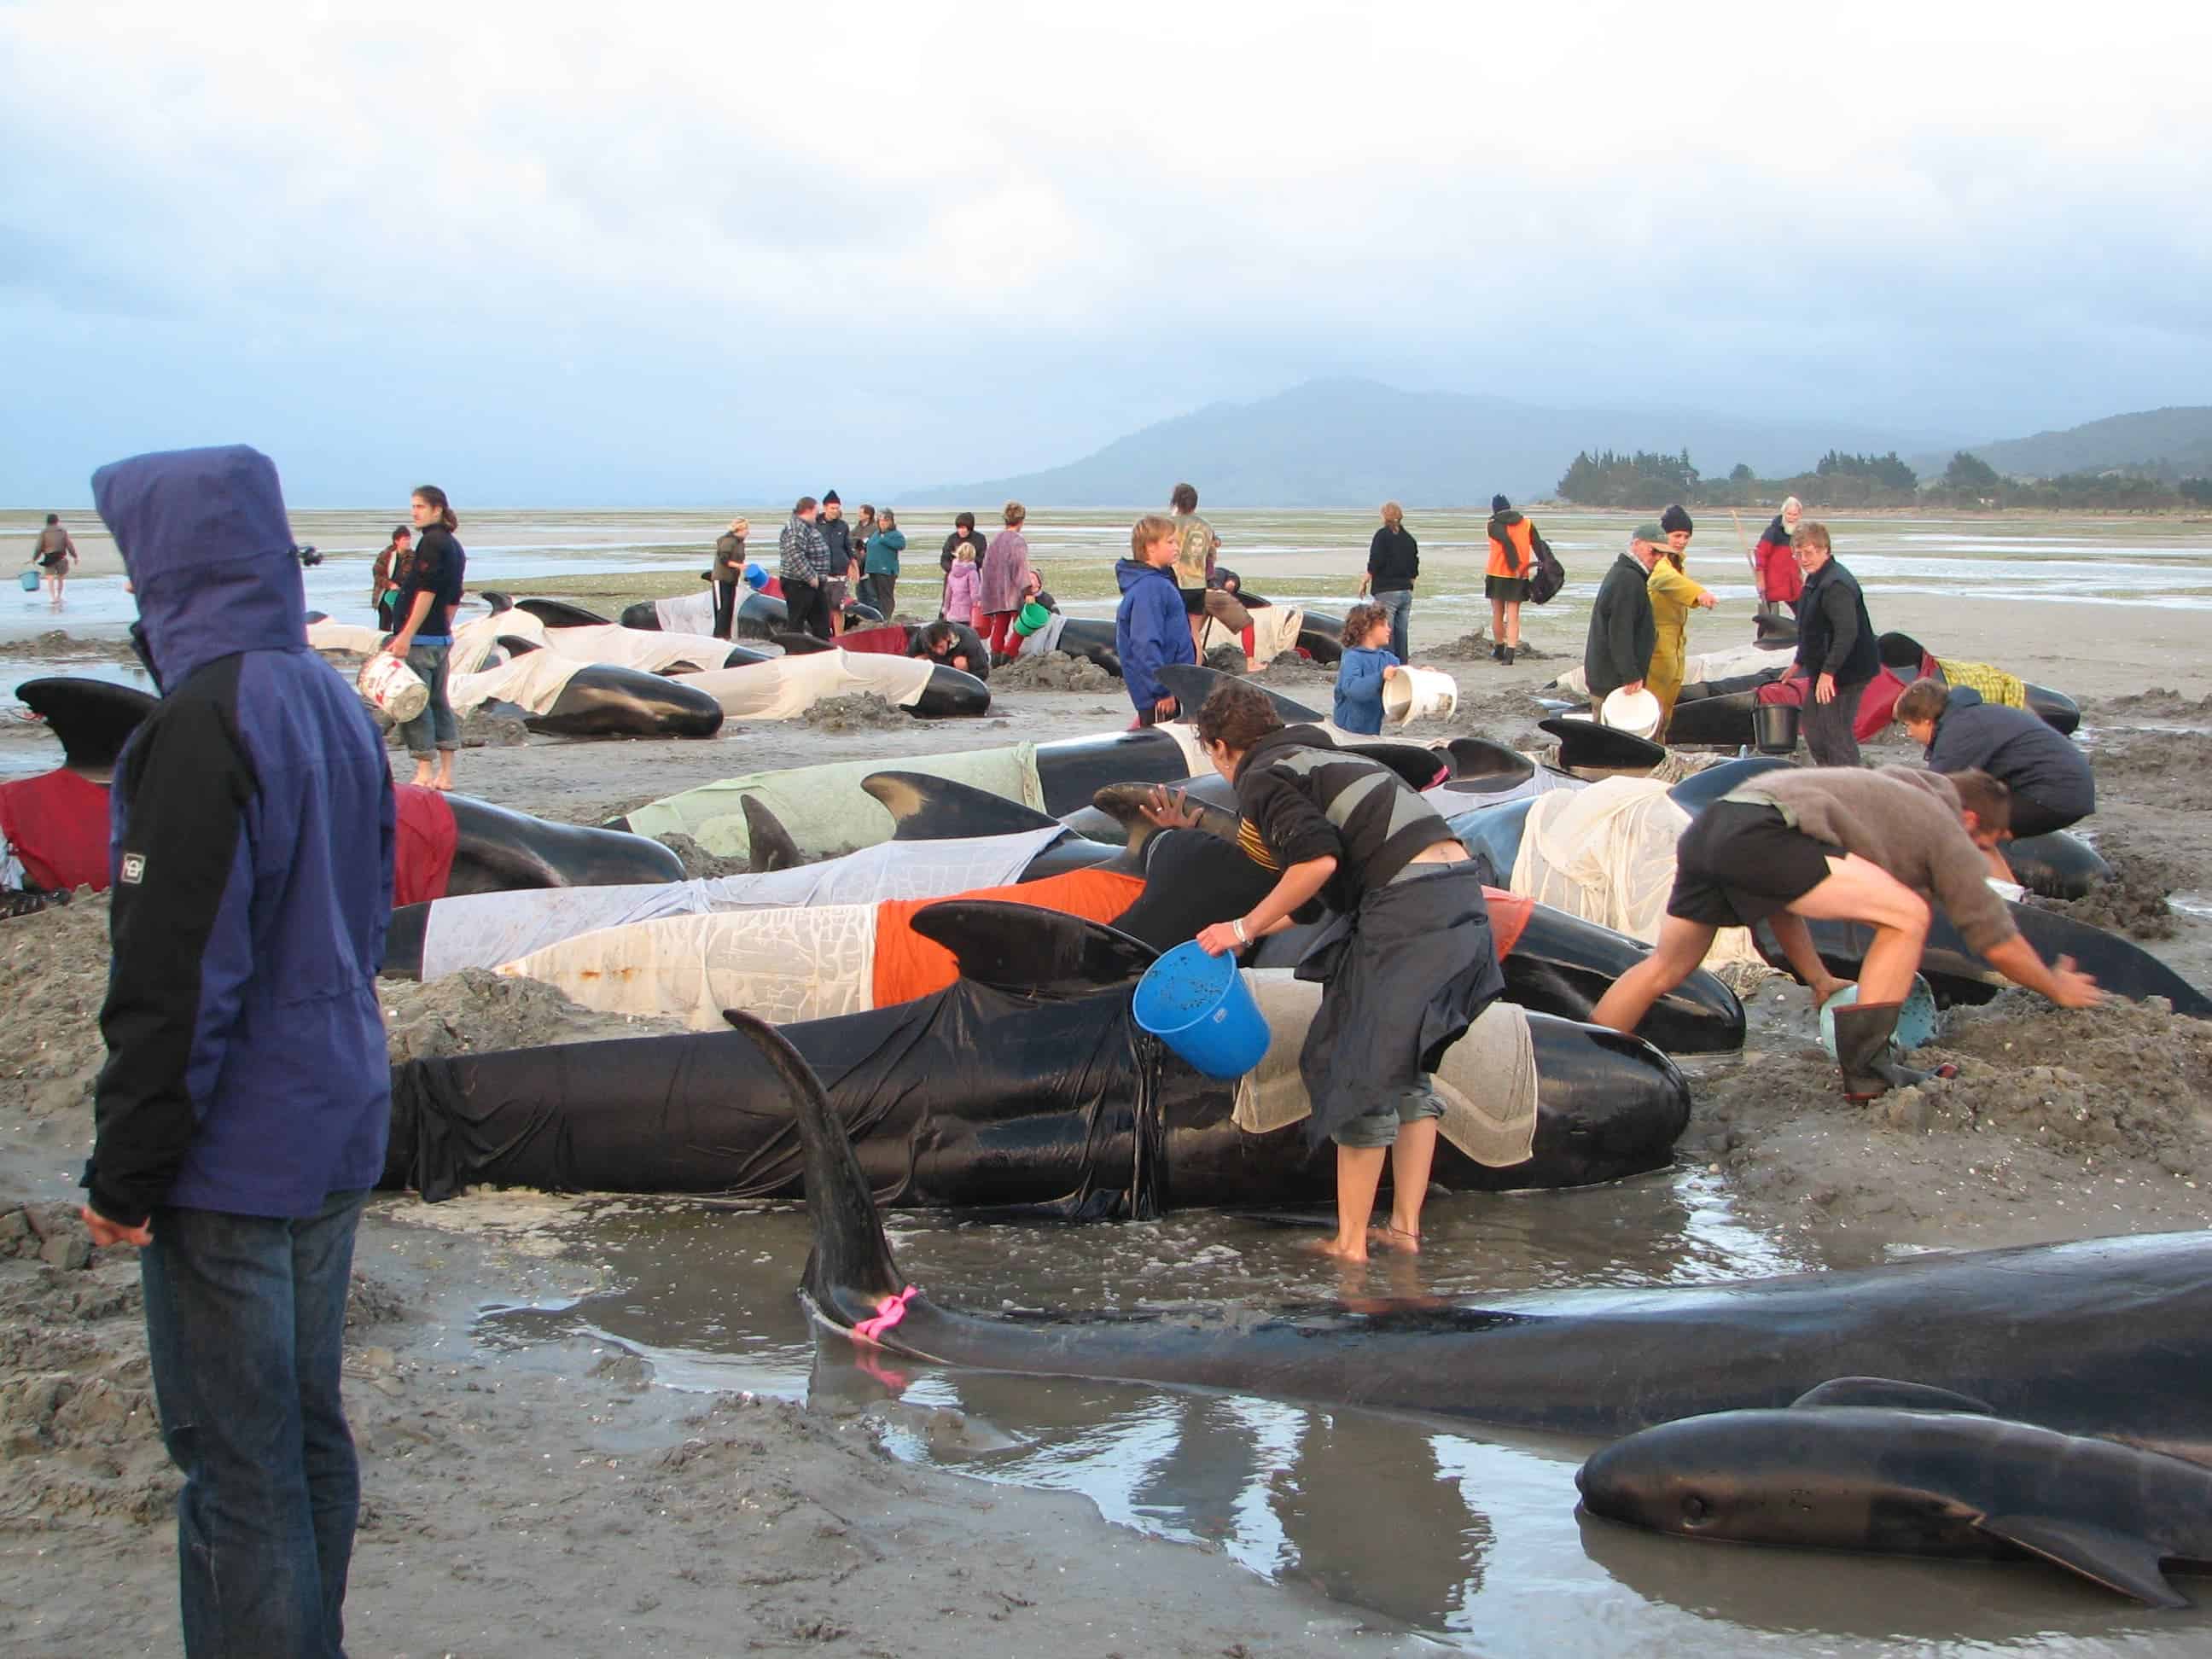 Volunteers helping beached whales in Golden bay, 2005. Image credits: Chagai